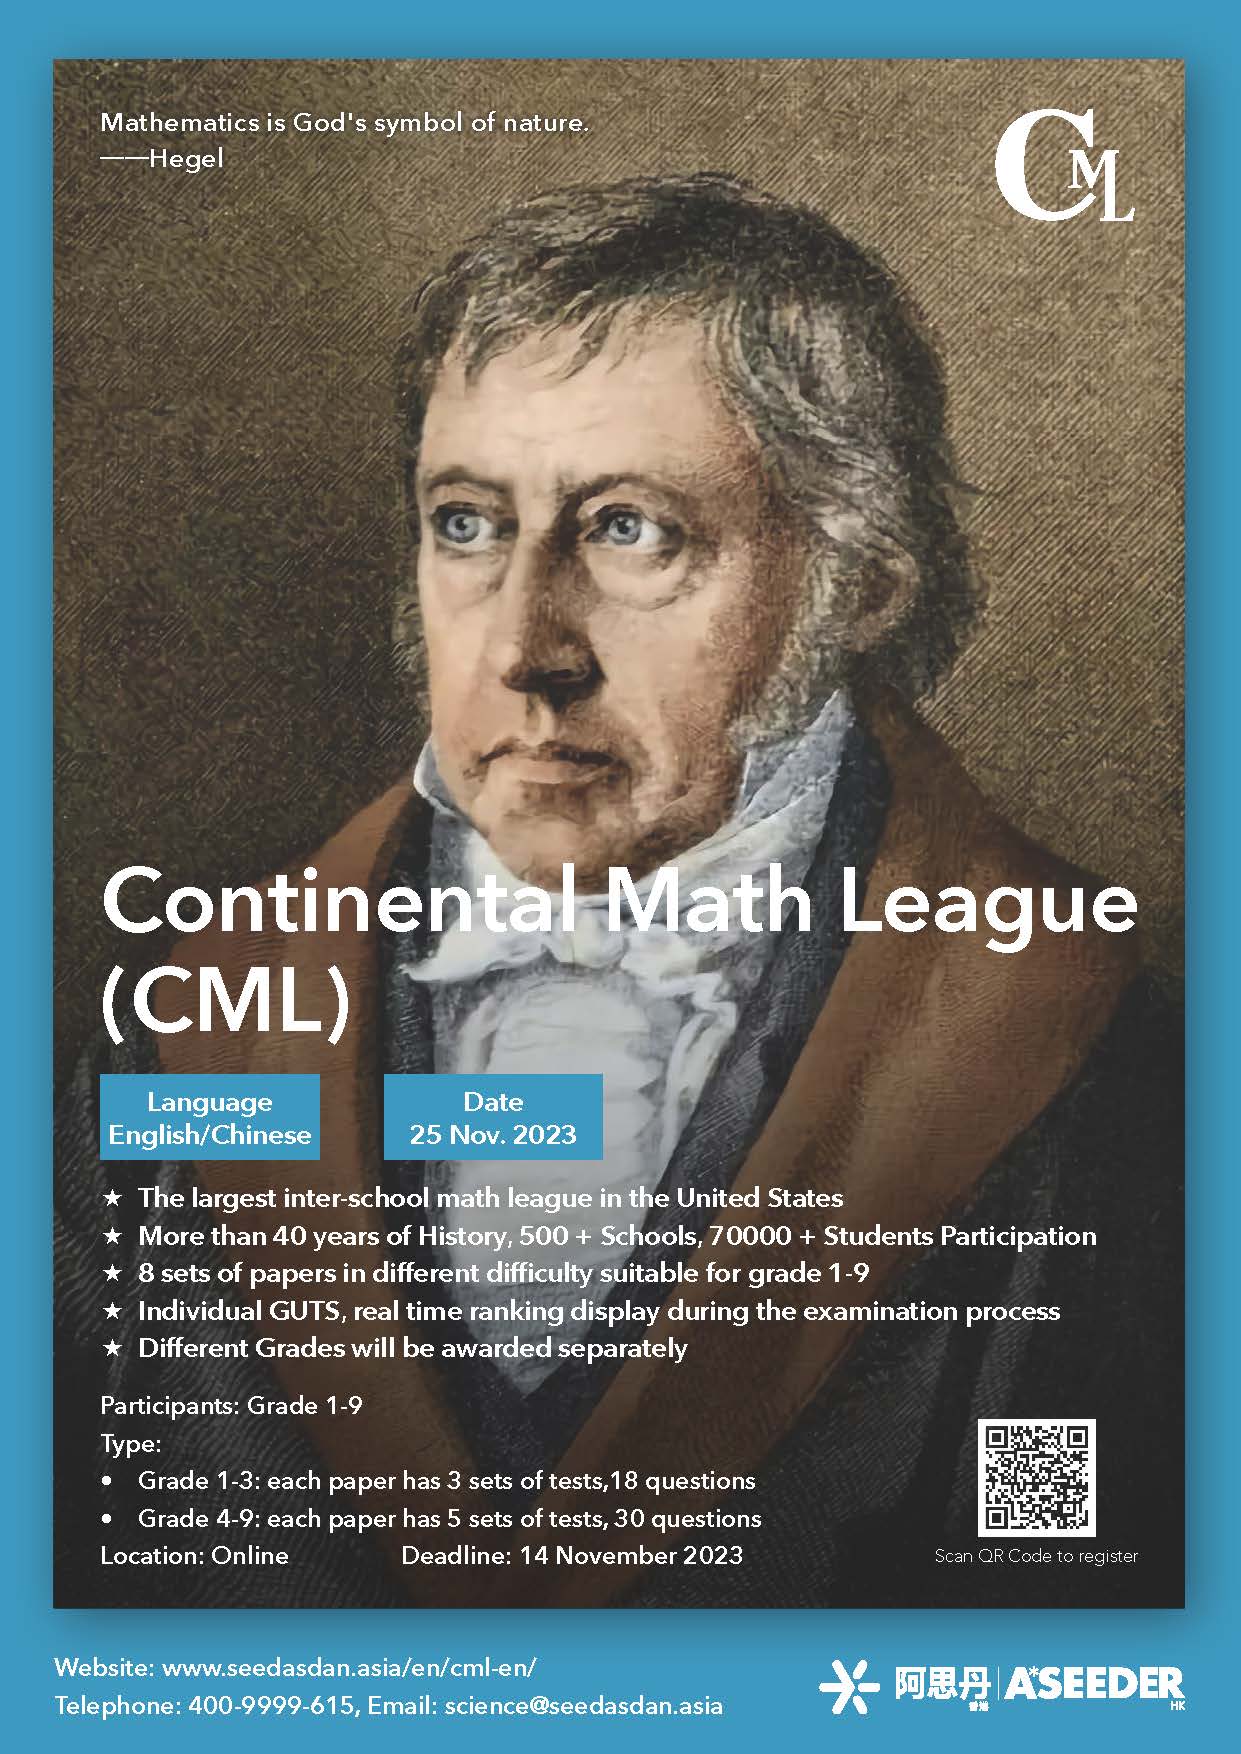 Registration For Continental Math League CML by 14 Nov 2023 - Registration For Continental Math League CML by 14 Nov 2023